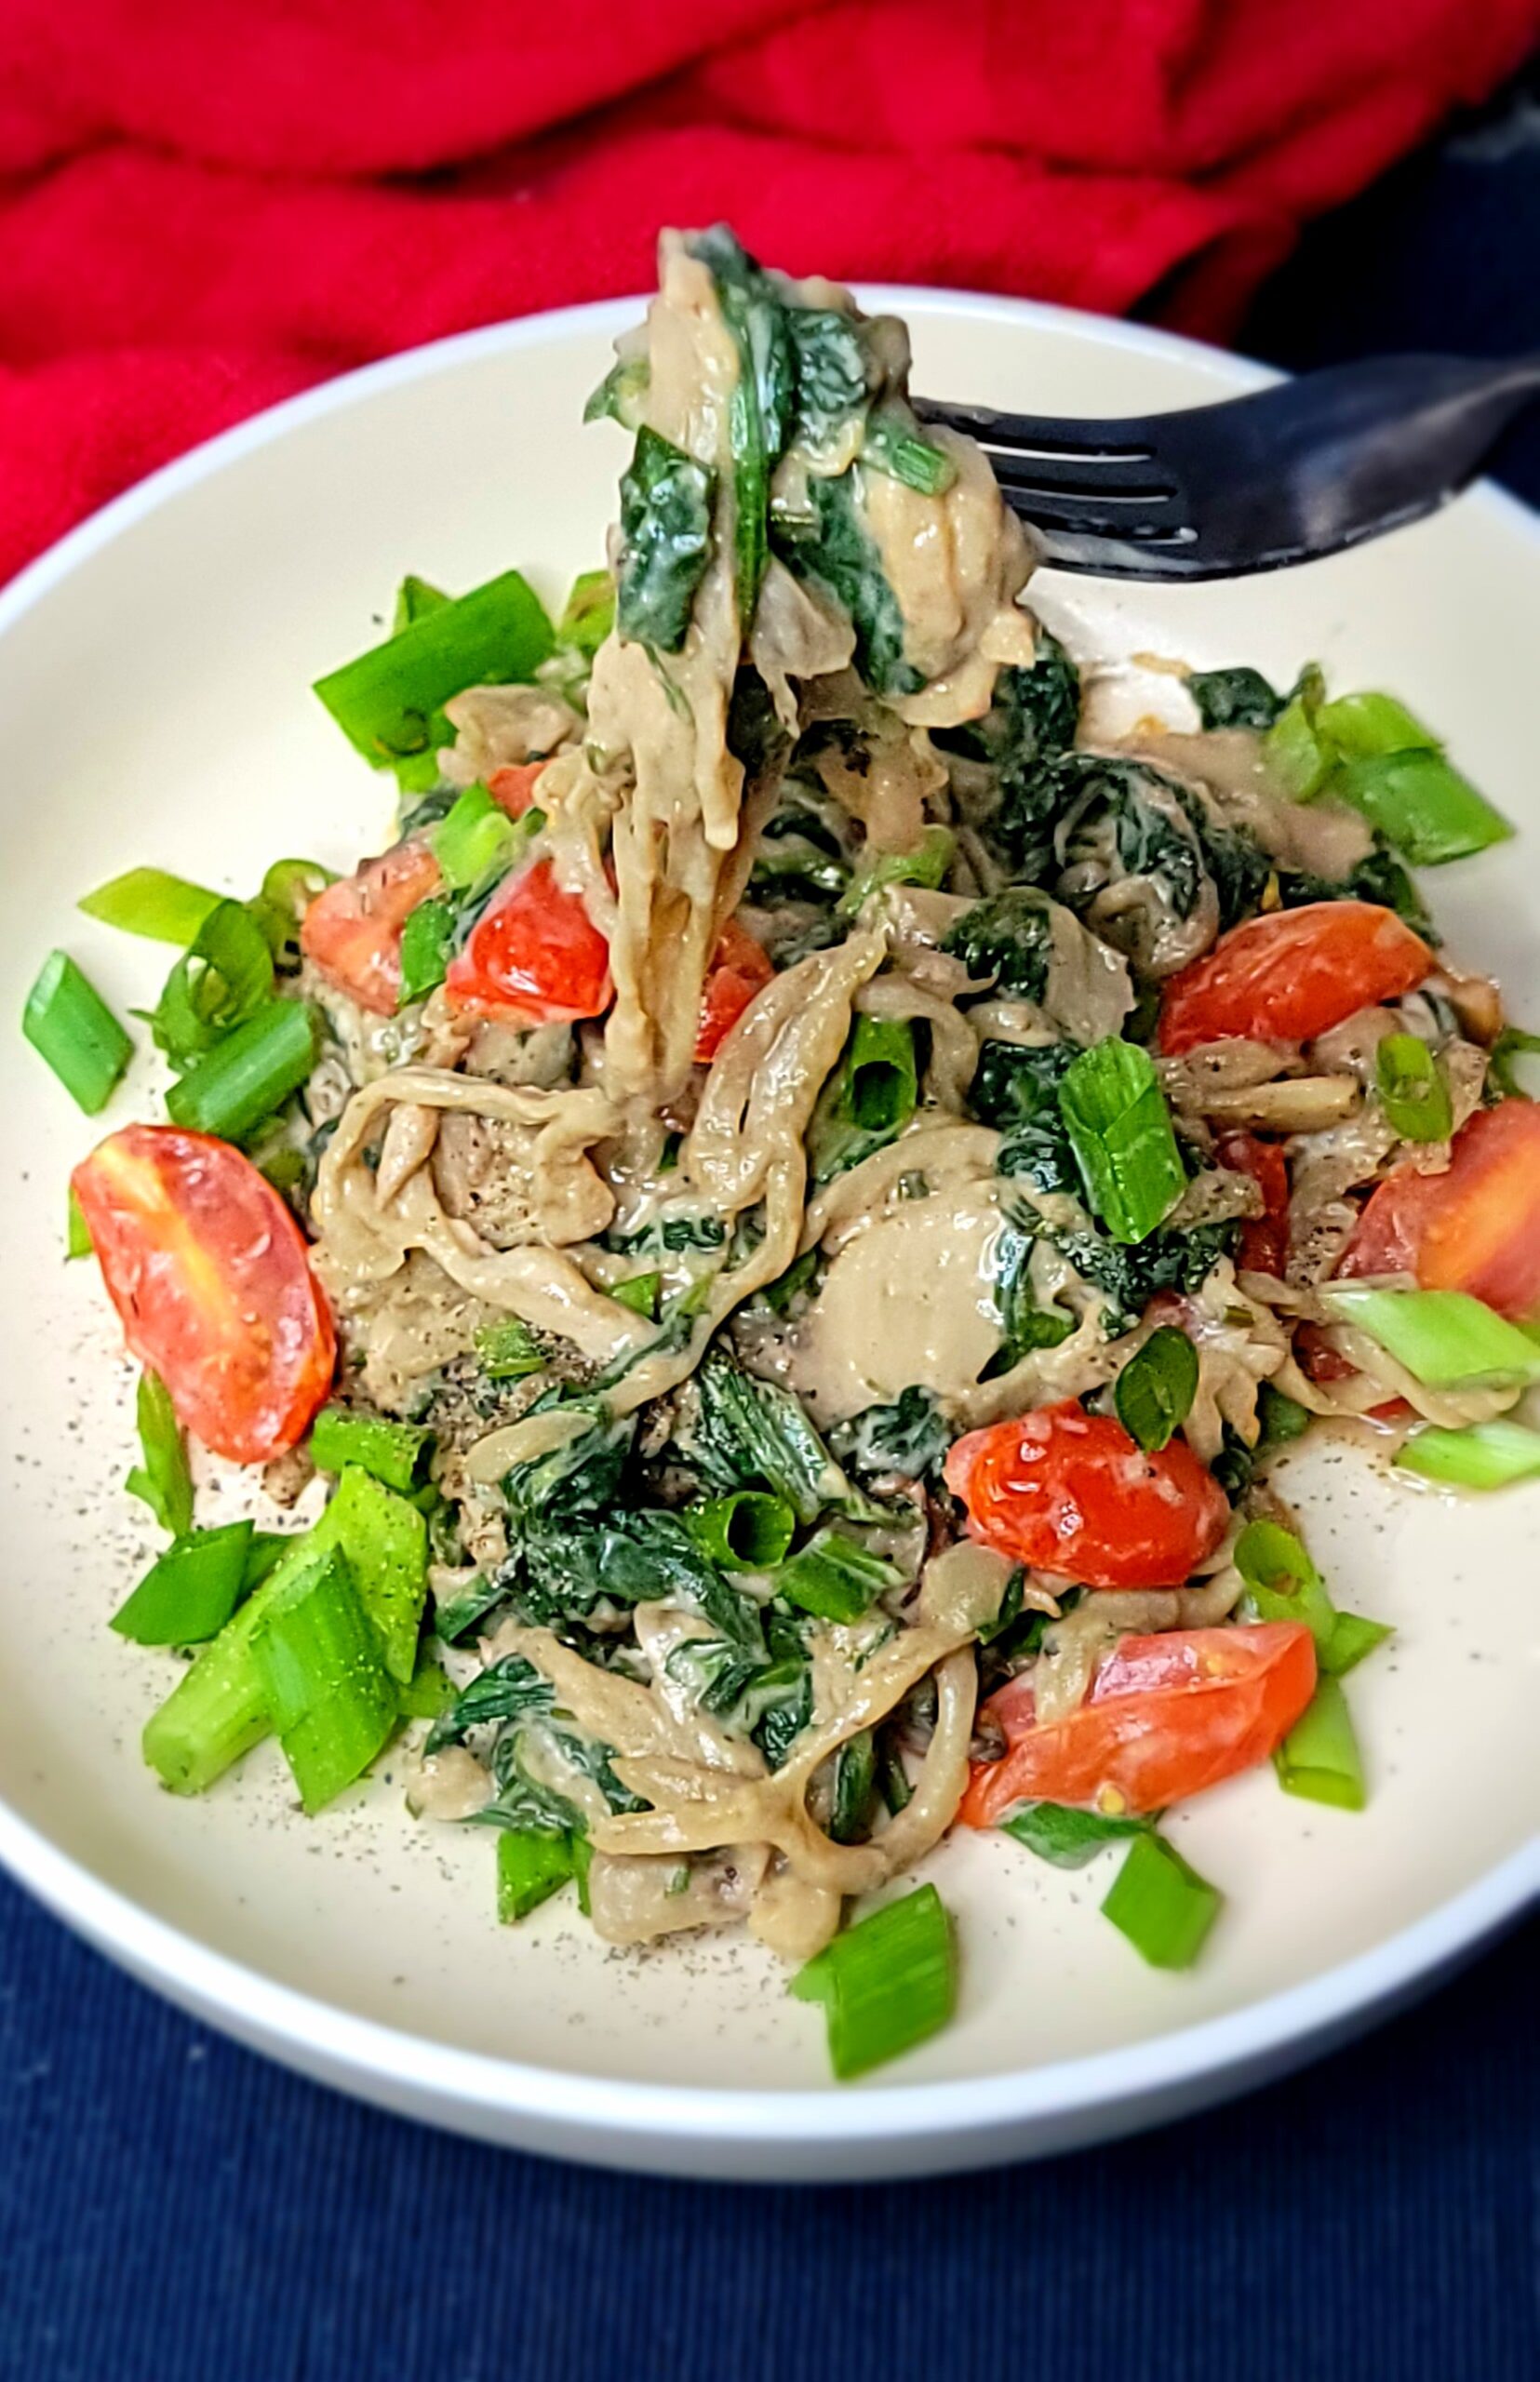 Eggplant Noodles with Spinach and Mushrooms